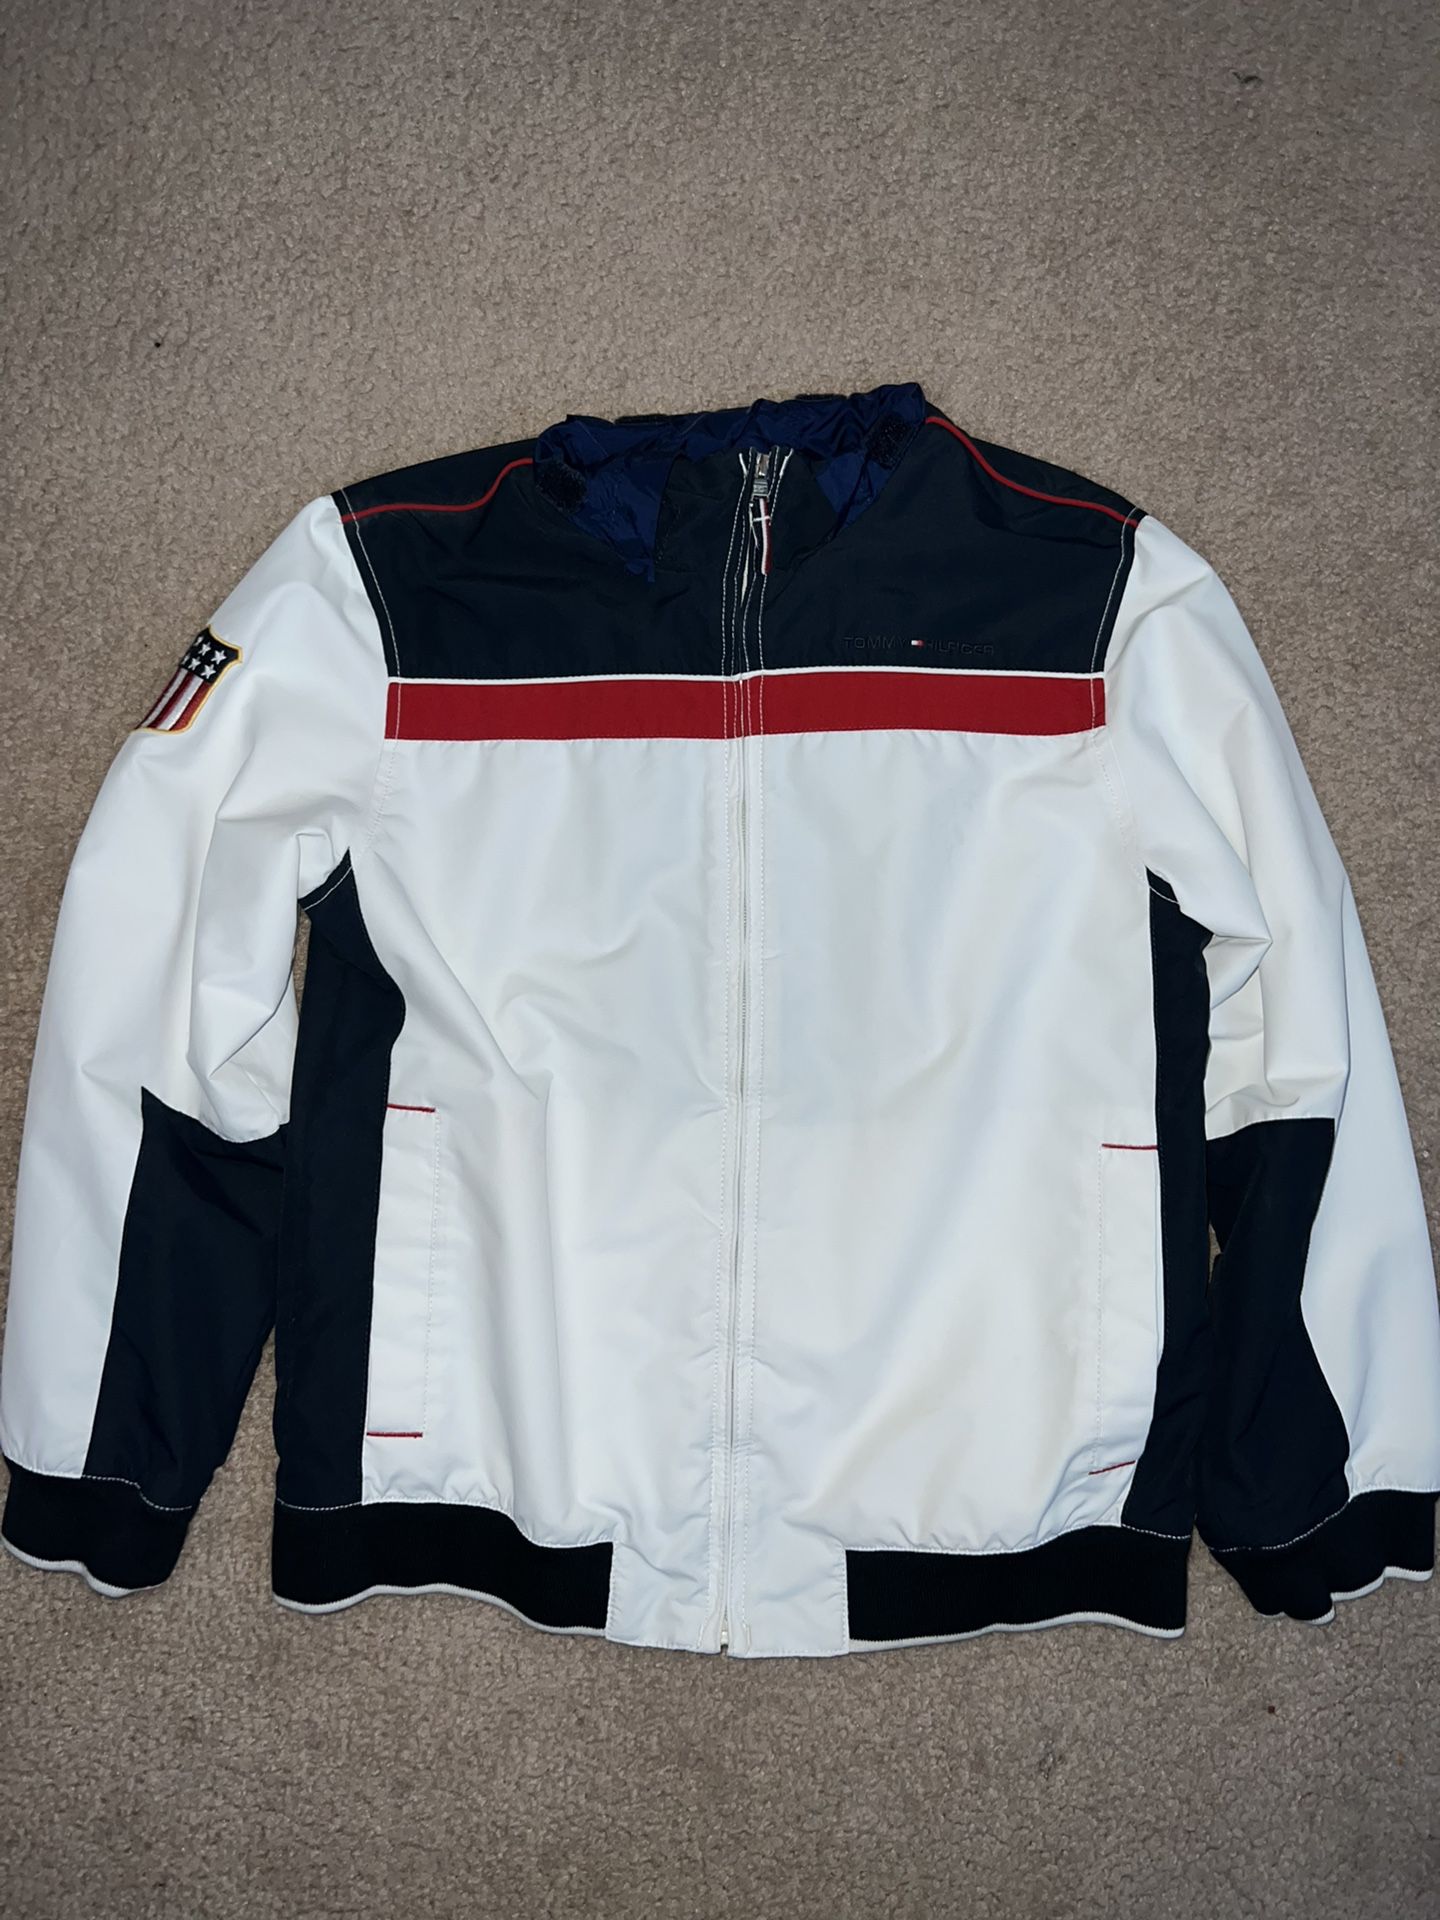 Authentic Tommy Hilfiger Waterproof Jacket 